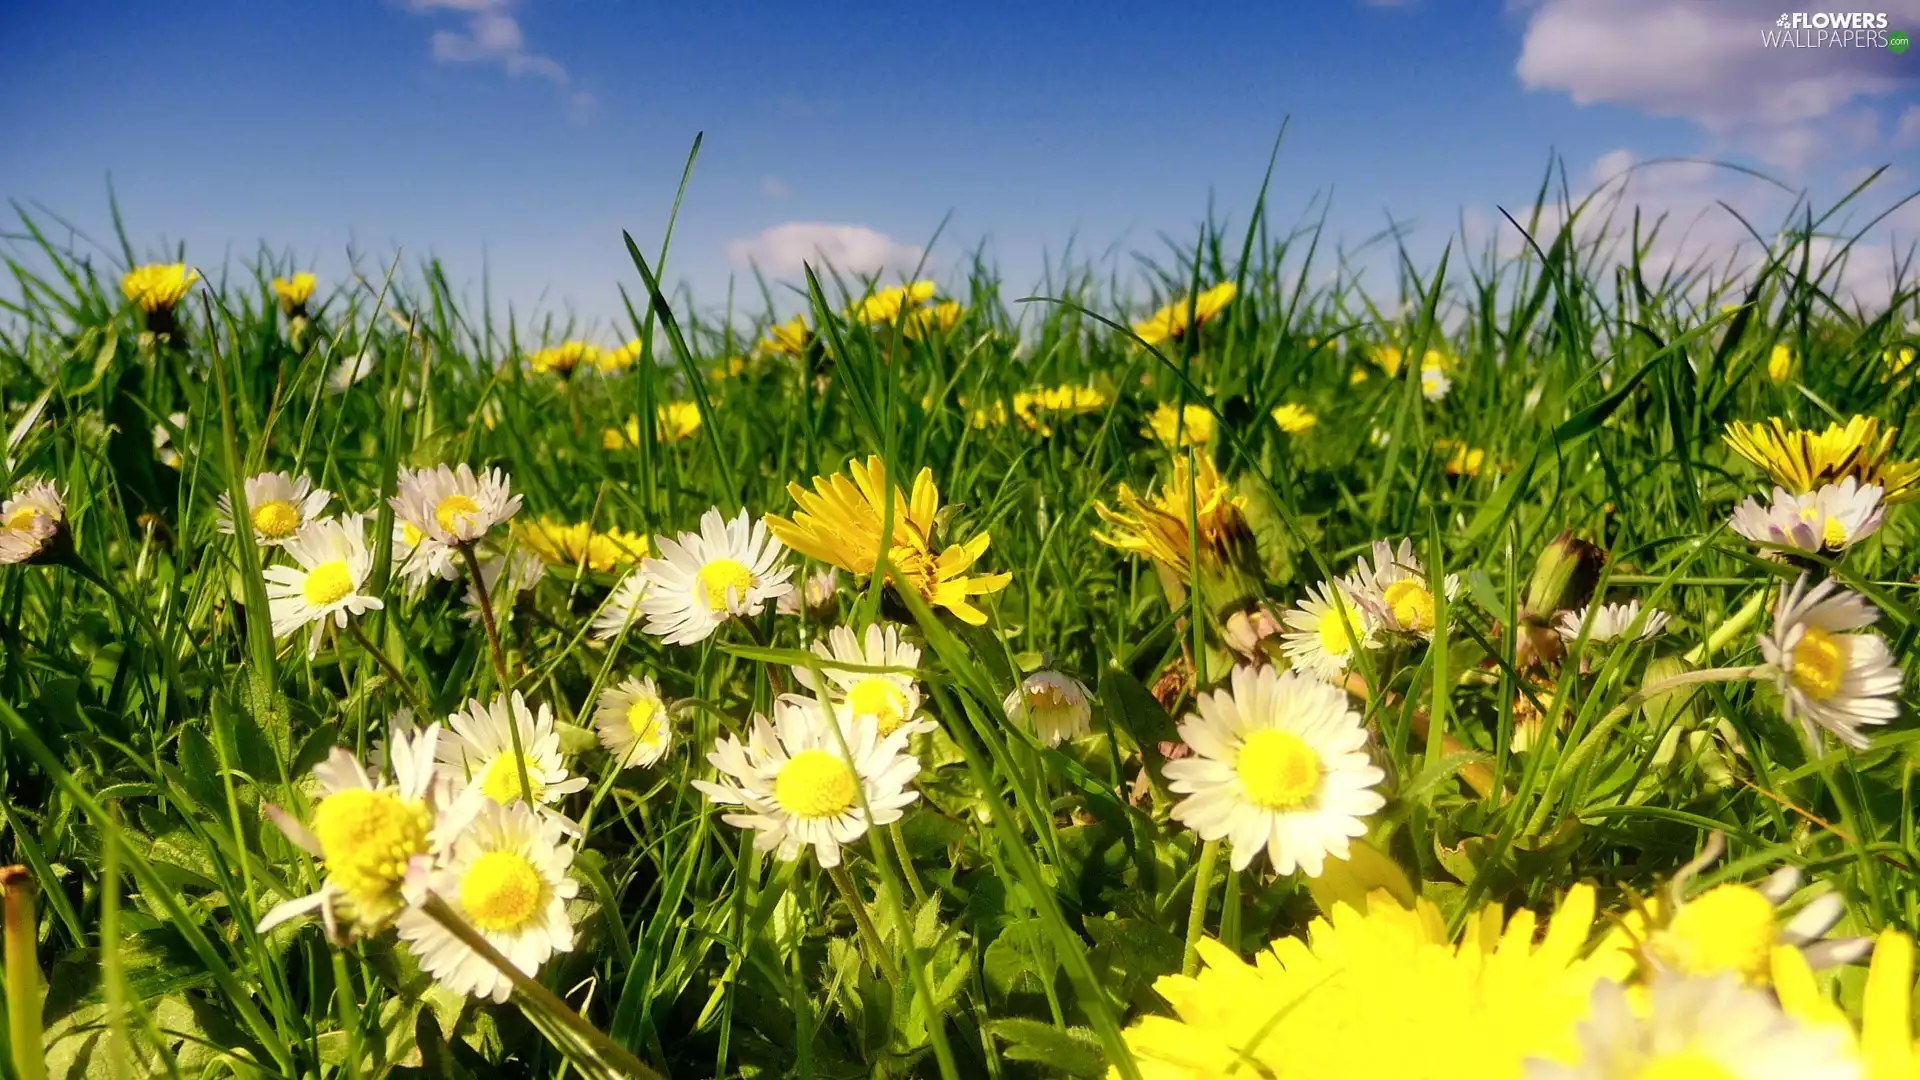 daisies, grass - Flowers wallpapers: 1920x1080